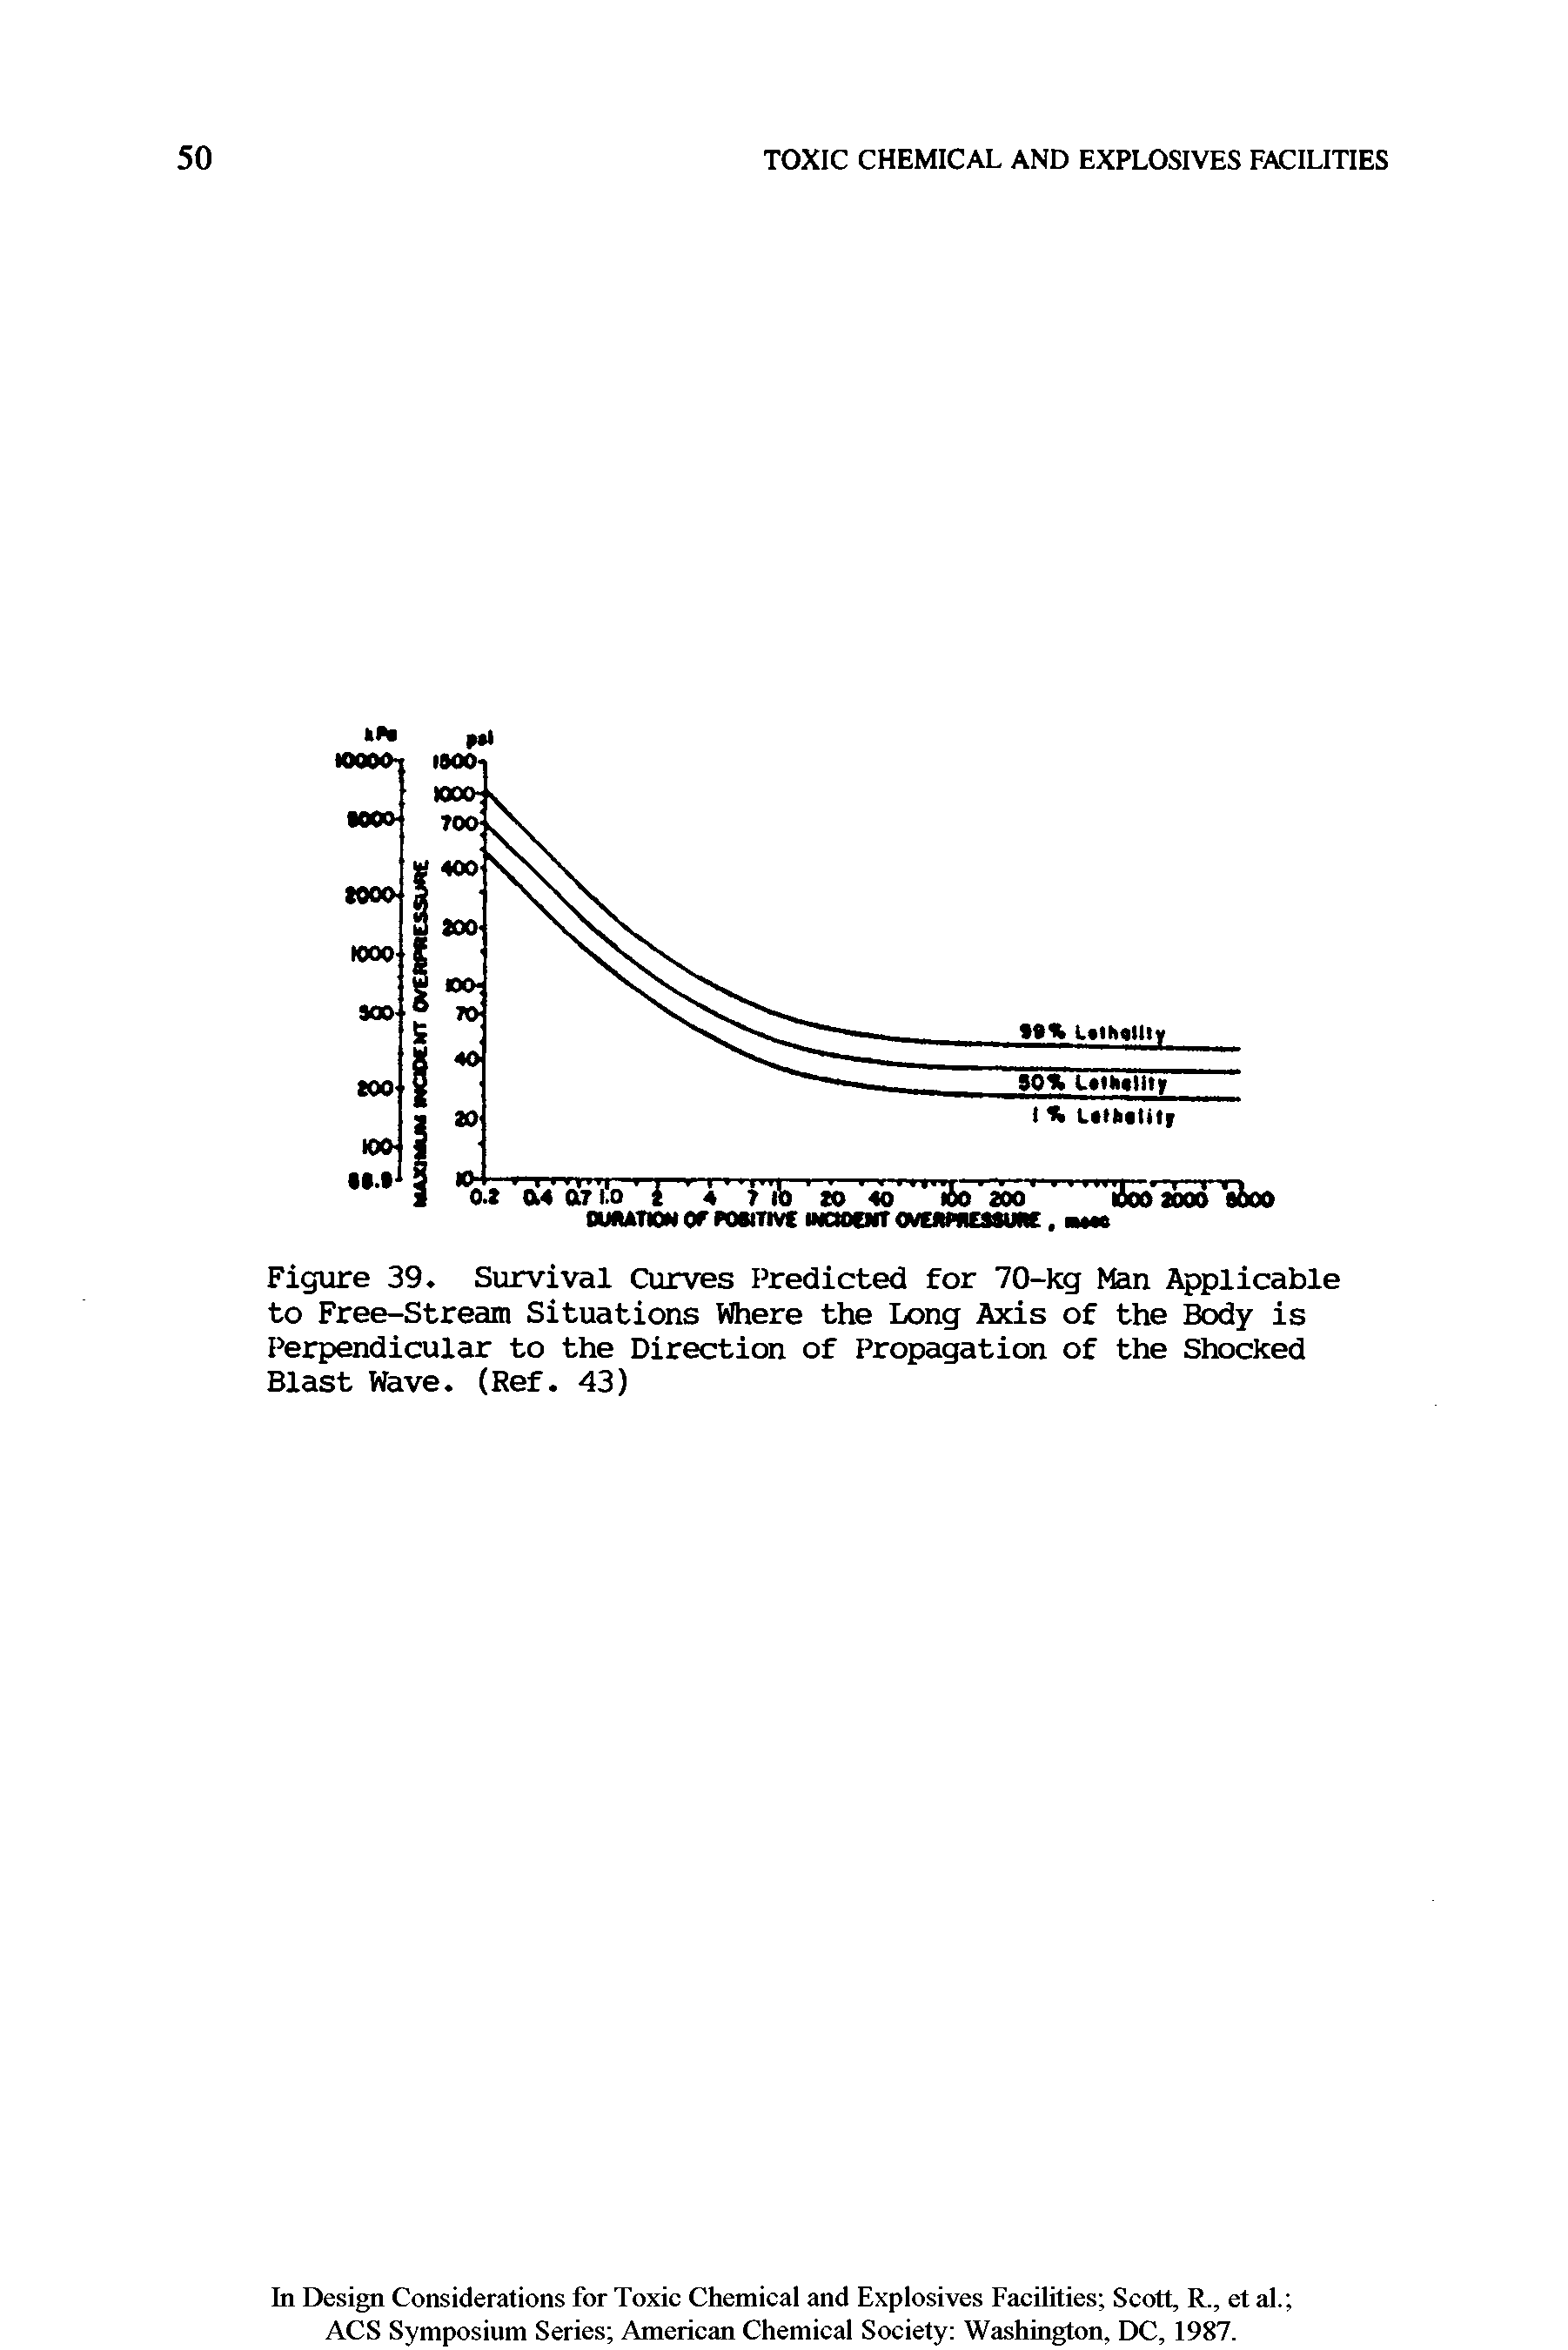 Figure 39. Survival Curves Predicted for 70-kg Man Applicable to Free-Stream Situations Where the Long Axis of the Body is Perpendicular to the Direction of Propagation of the Shocked Blast Wave. (Ref. 43)...